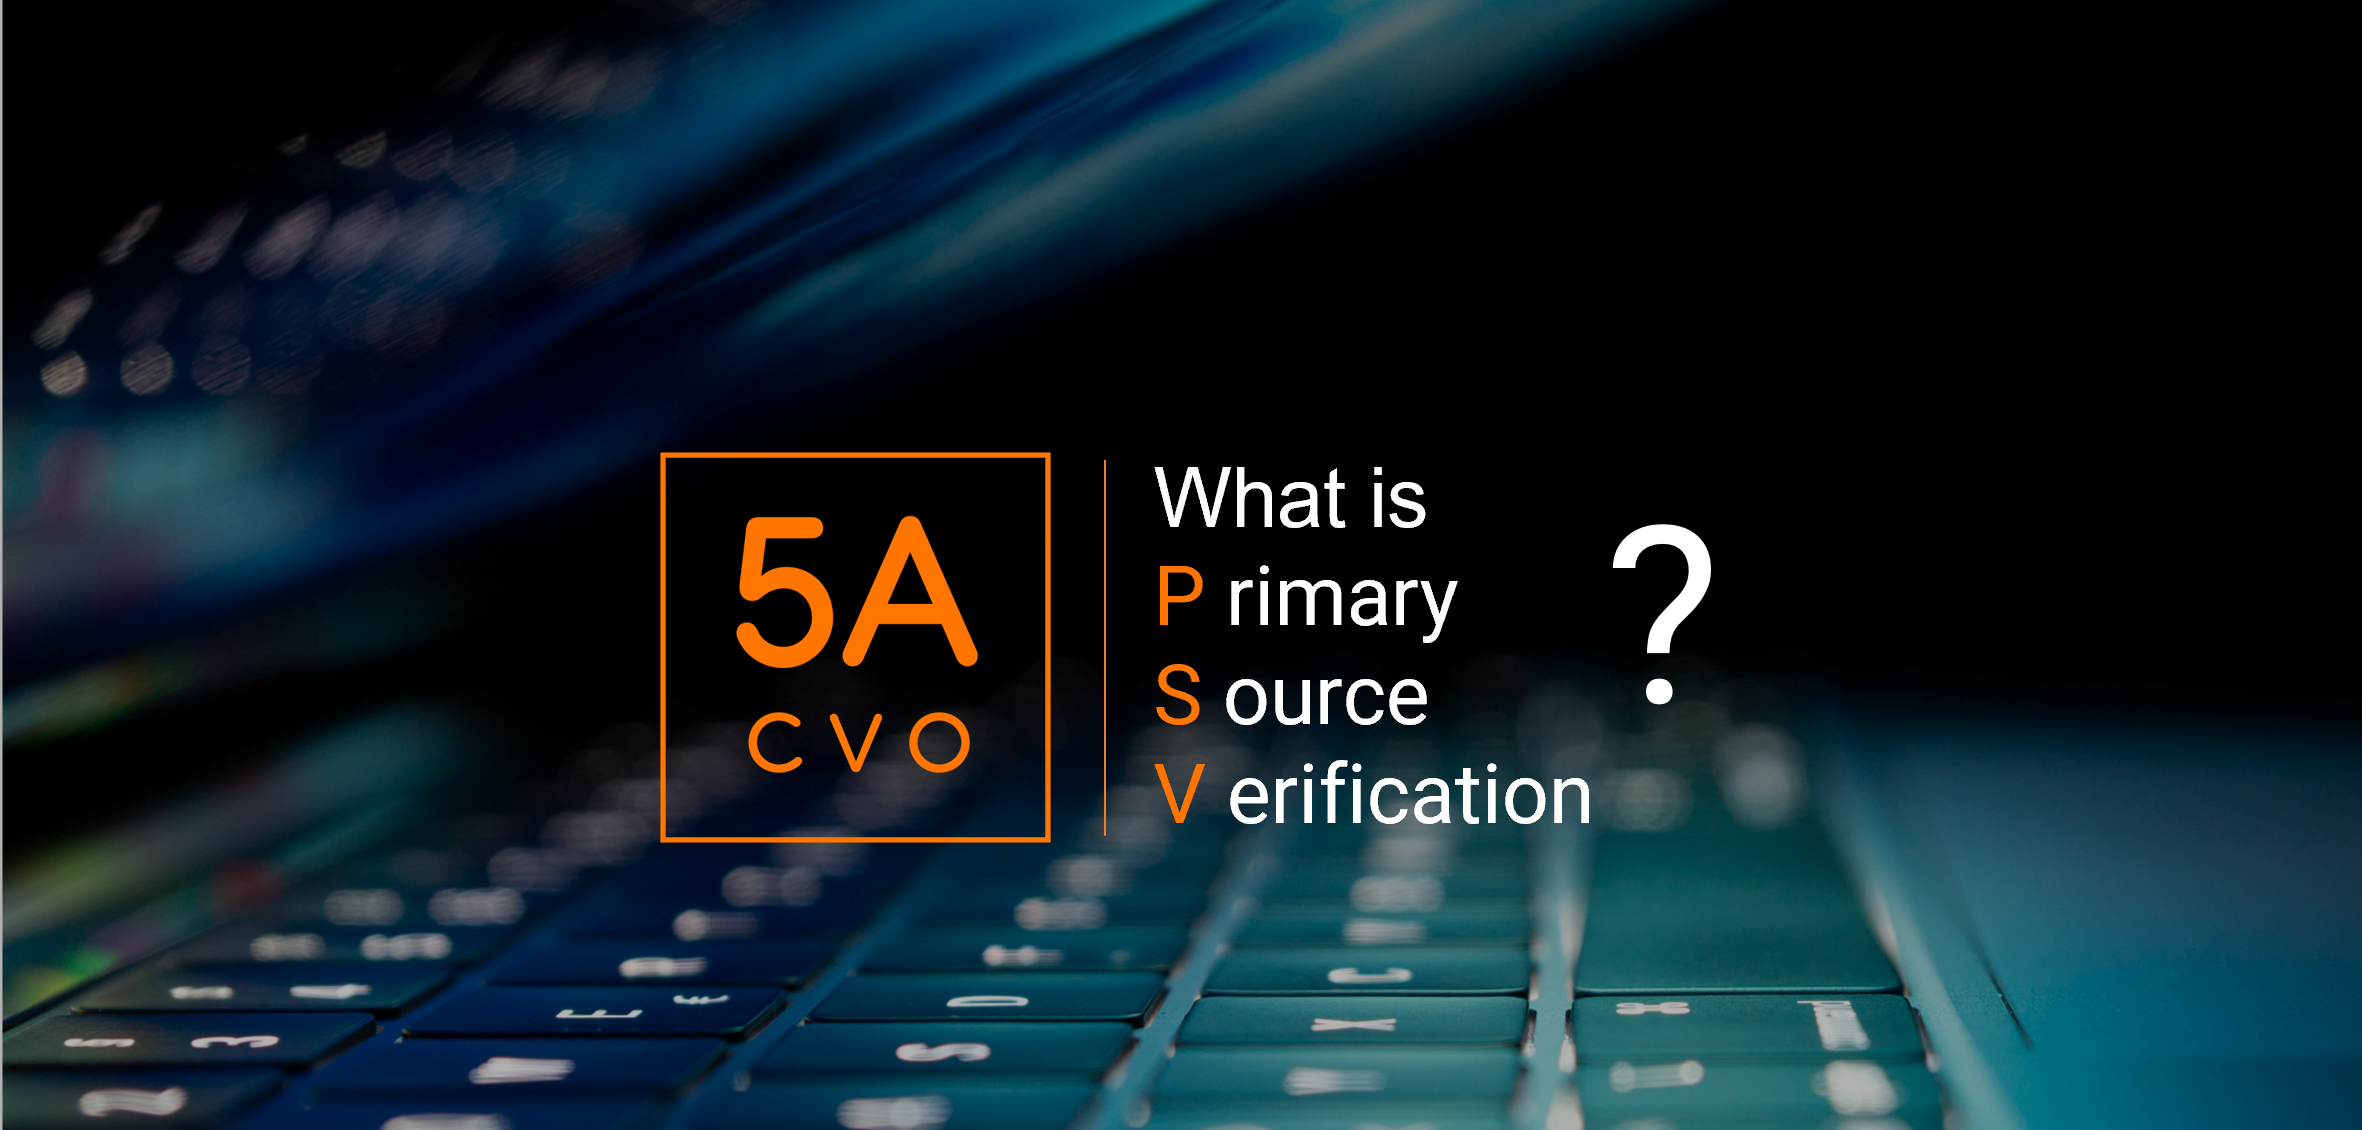 What Is Primary Source Verification (Psv) In Credentialing?